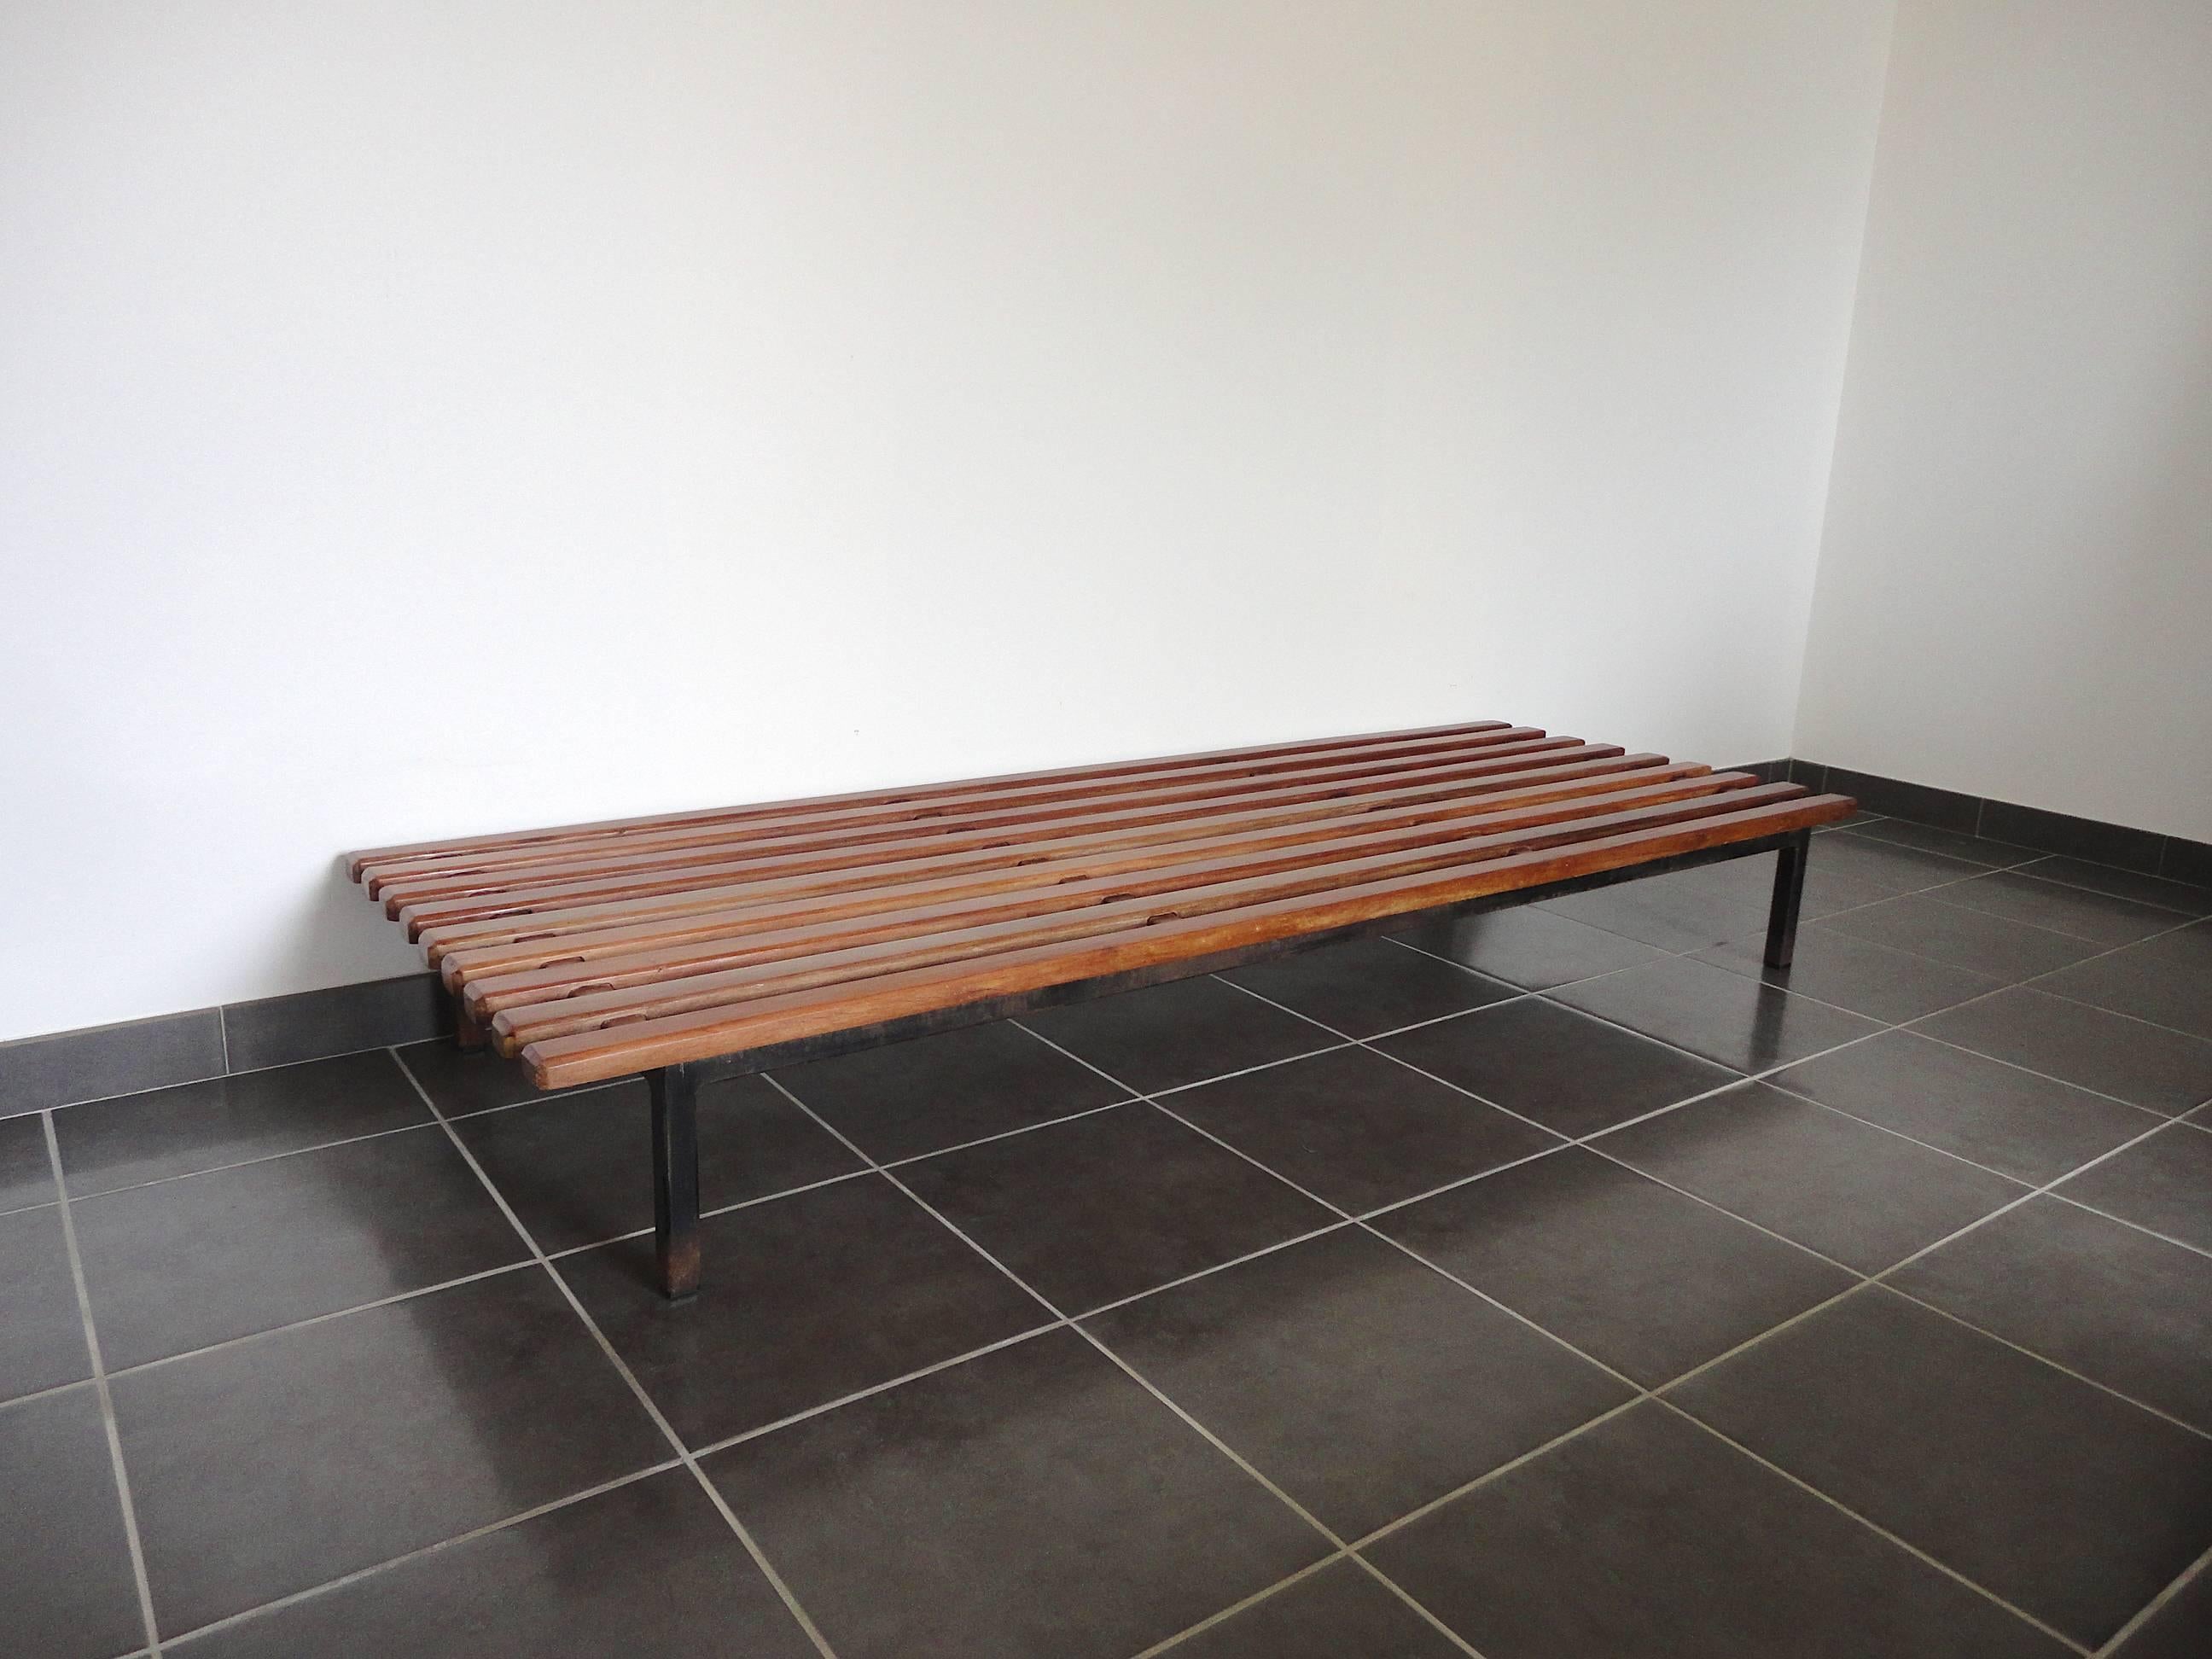 Slat bench or coffee table designed by Charlotte Perriand and produced by Steph Simon. It was made and used in the North African mining town of Cansado, Mauritania in the late 1950s. It features nine mahogany slats on a metal frame with four legs.